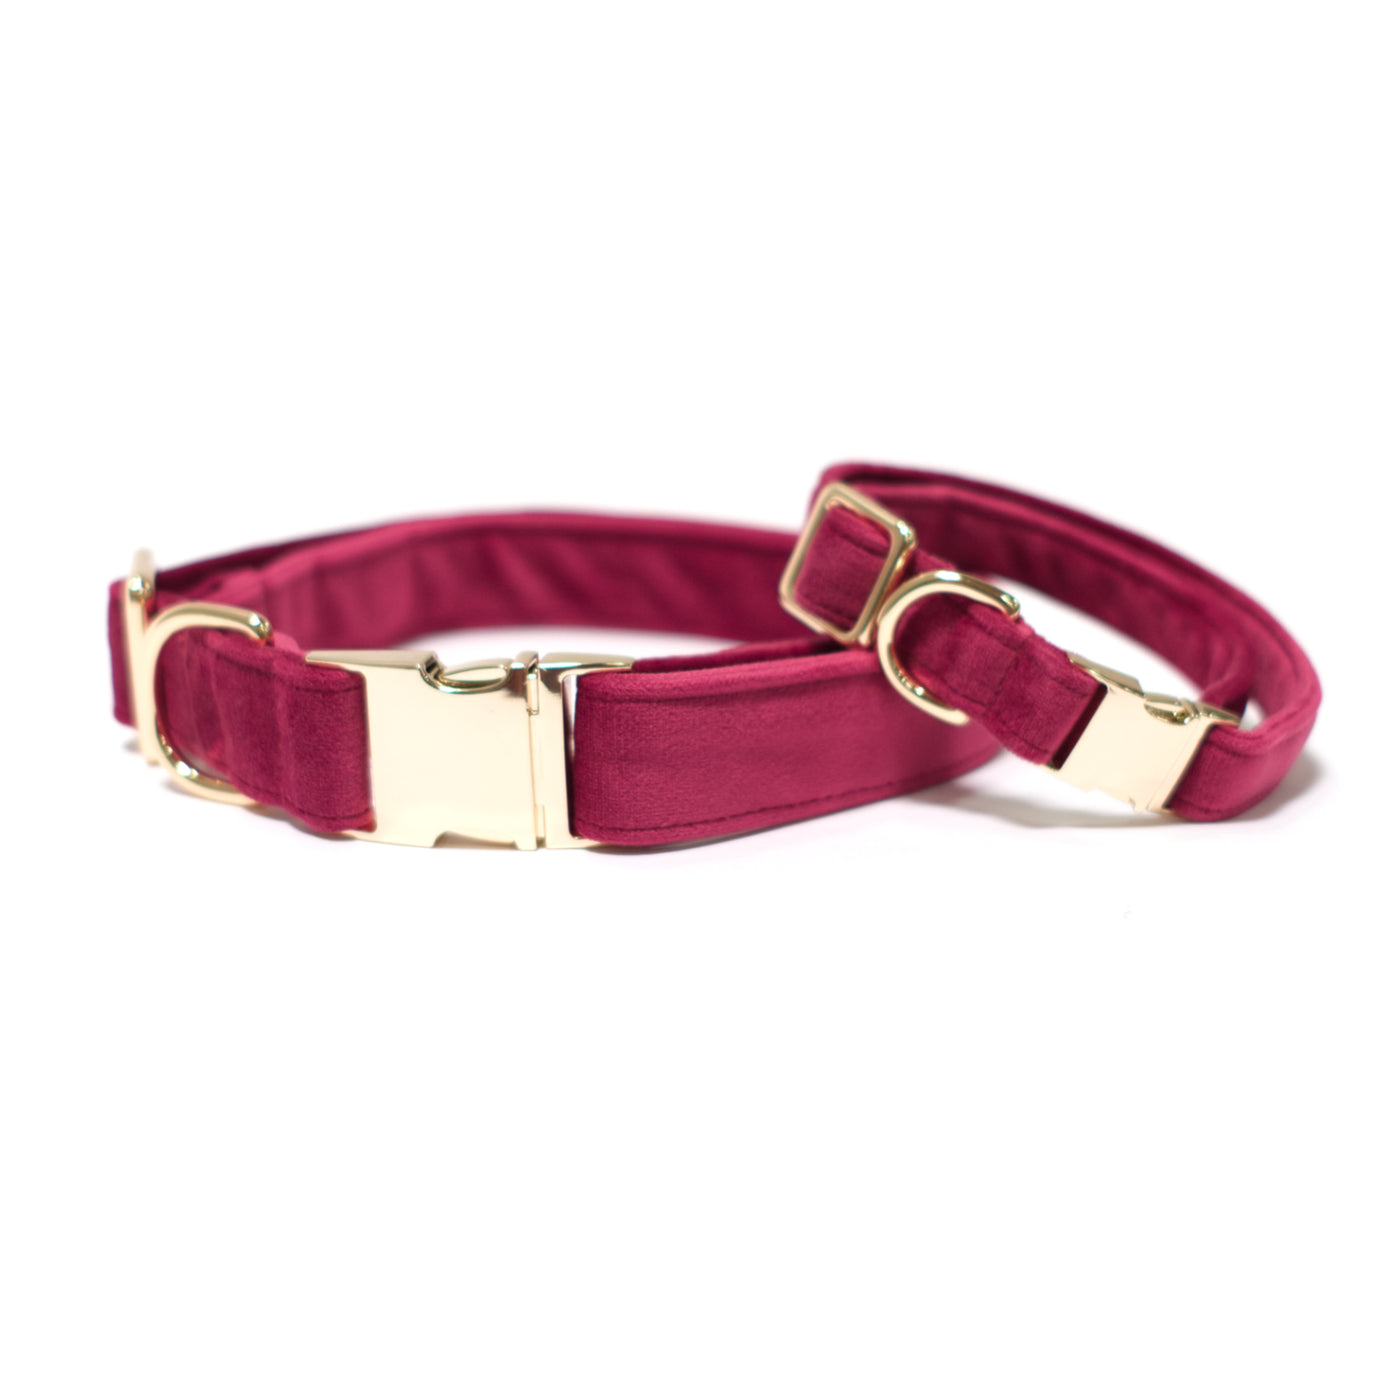 Burgundy velvet dog collars with gold hardware in small and medium